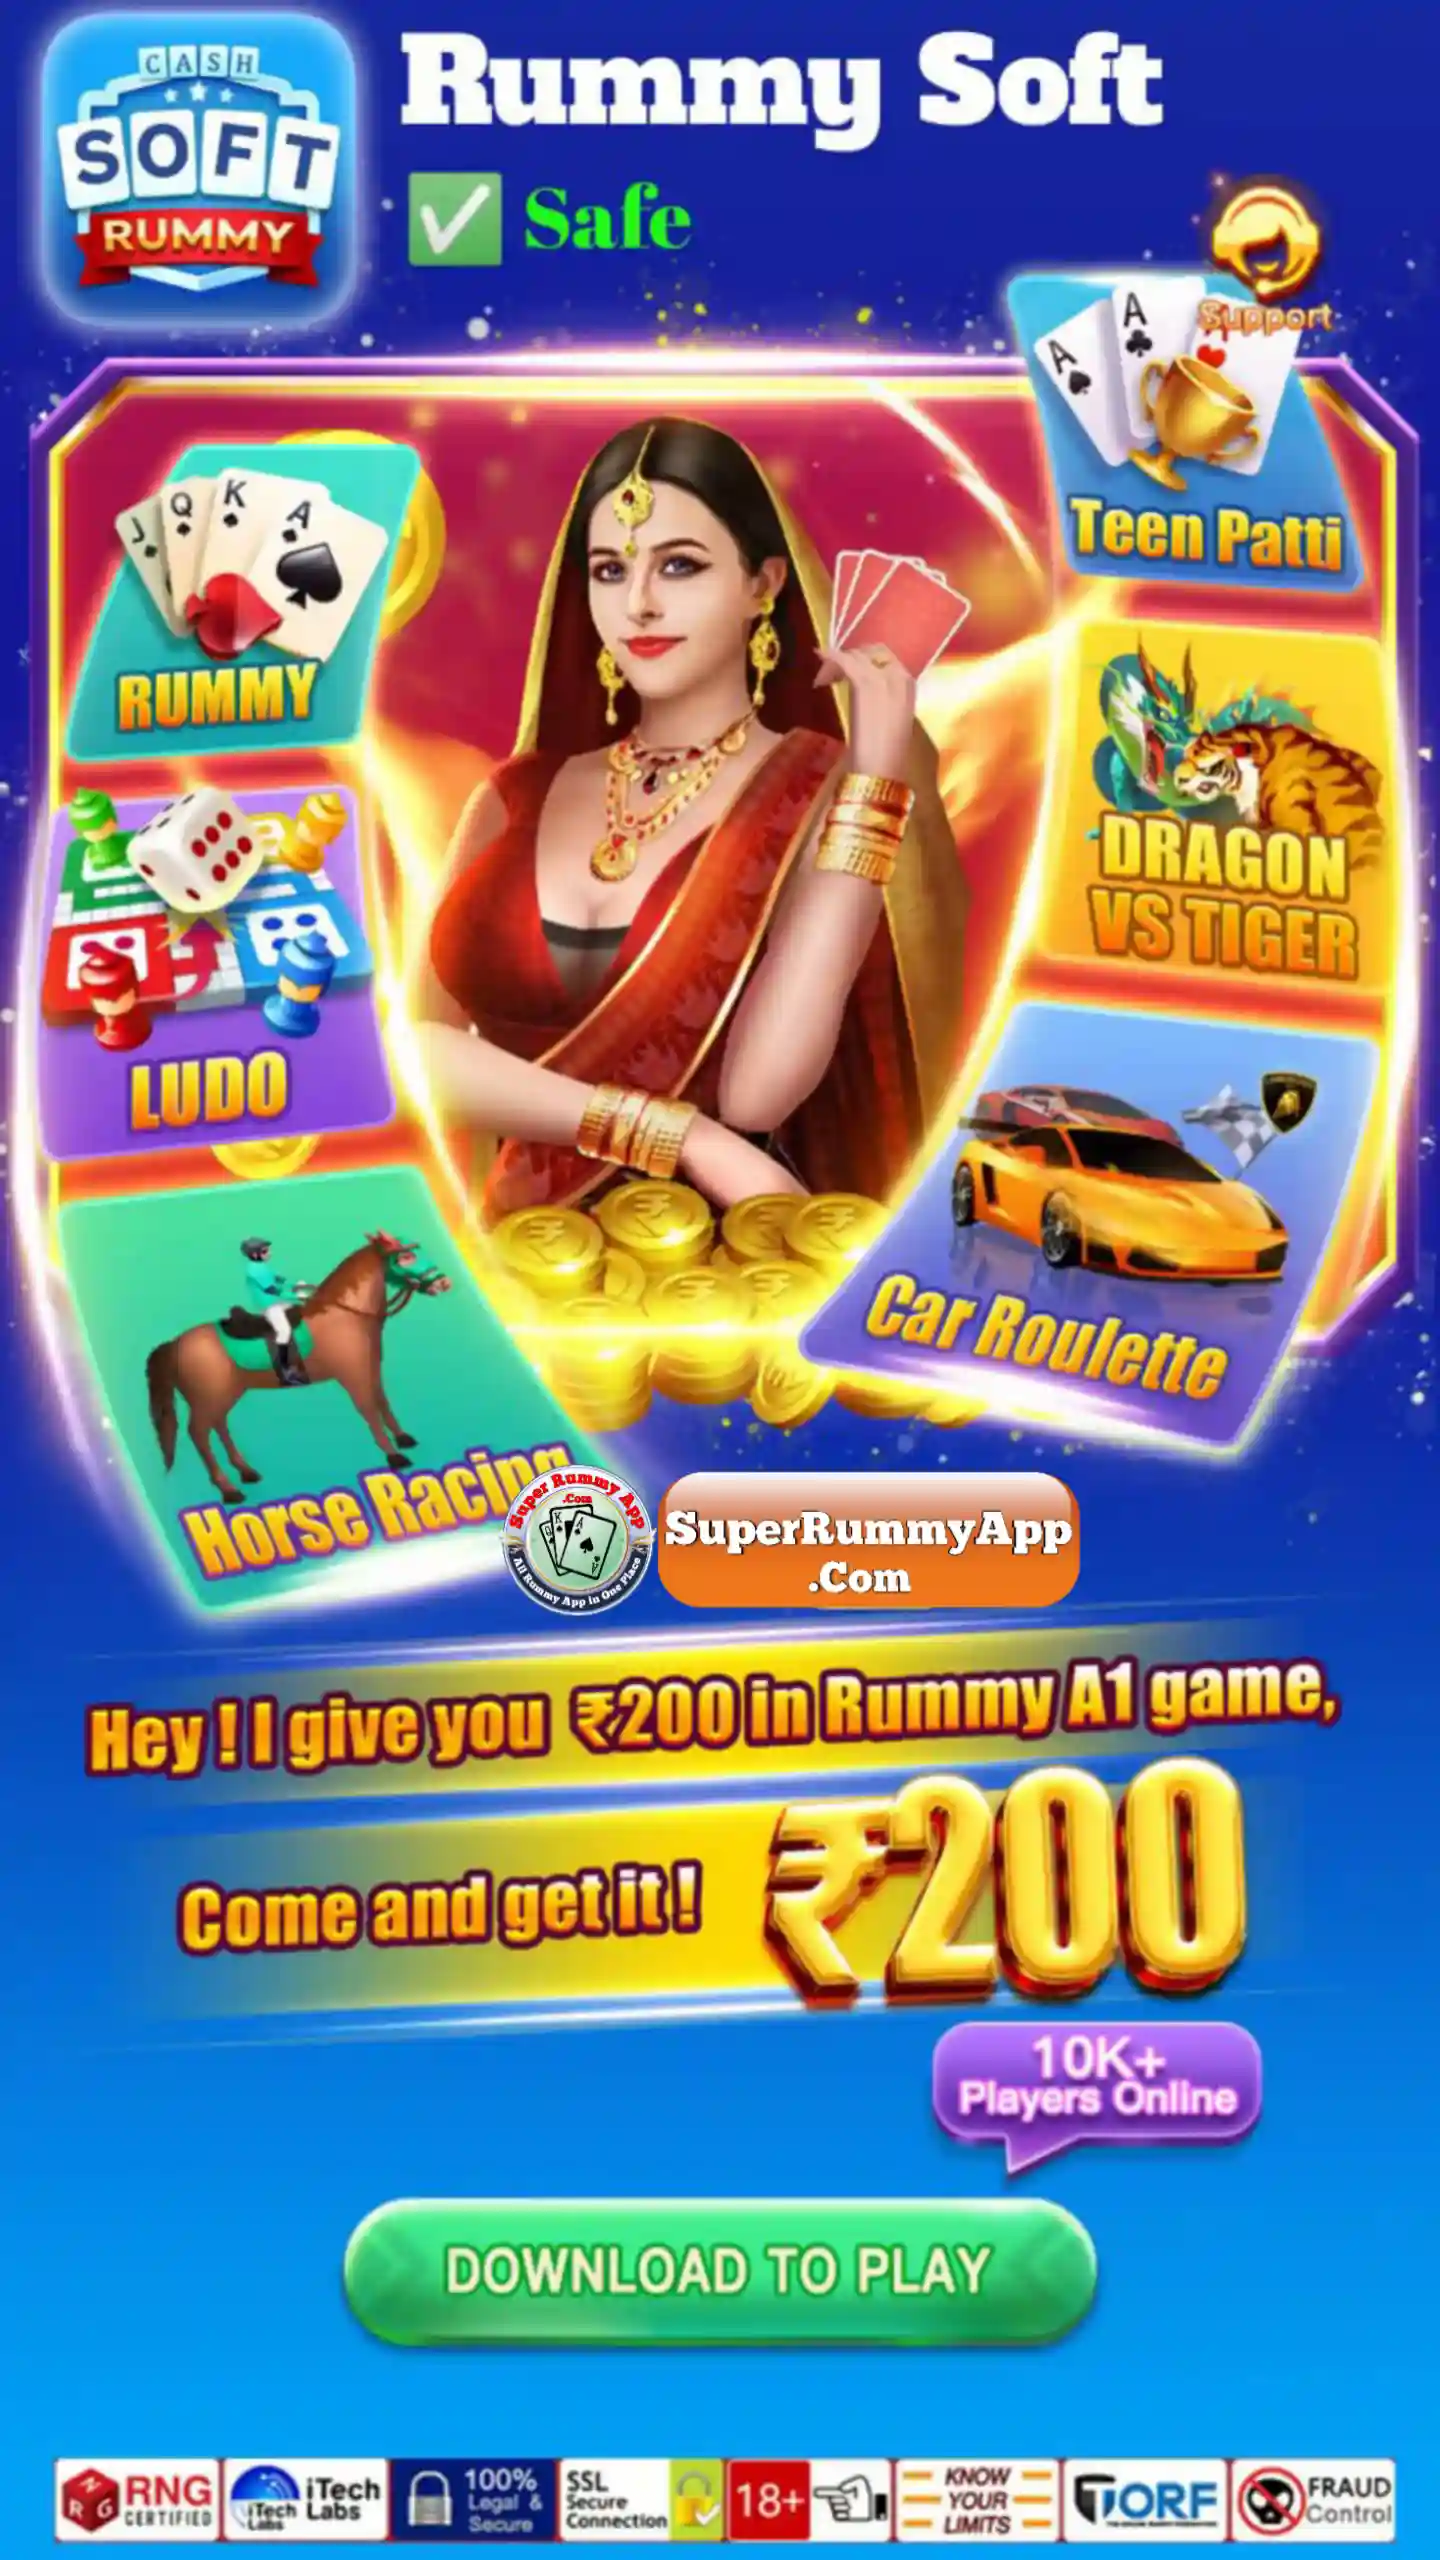 Rummy Soft App Download - All Rummy Apps